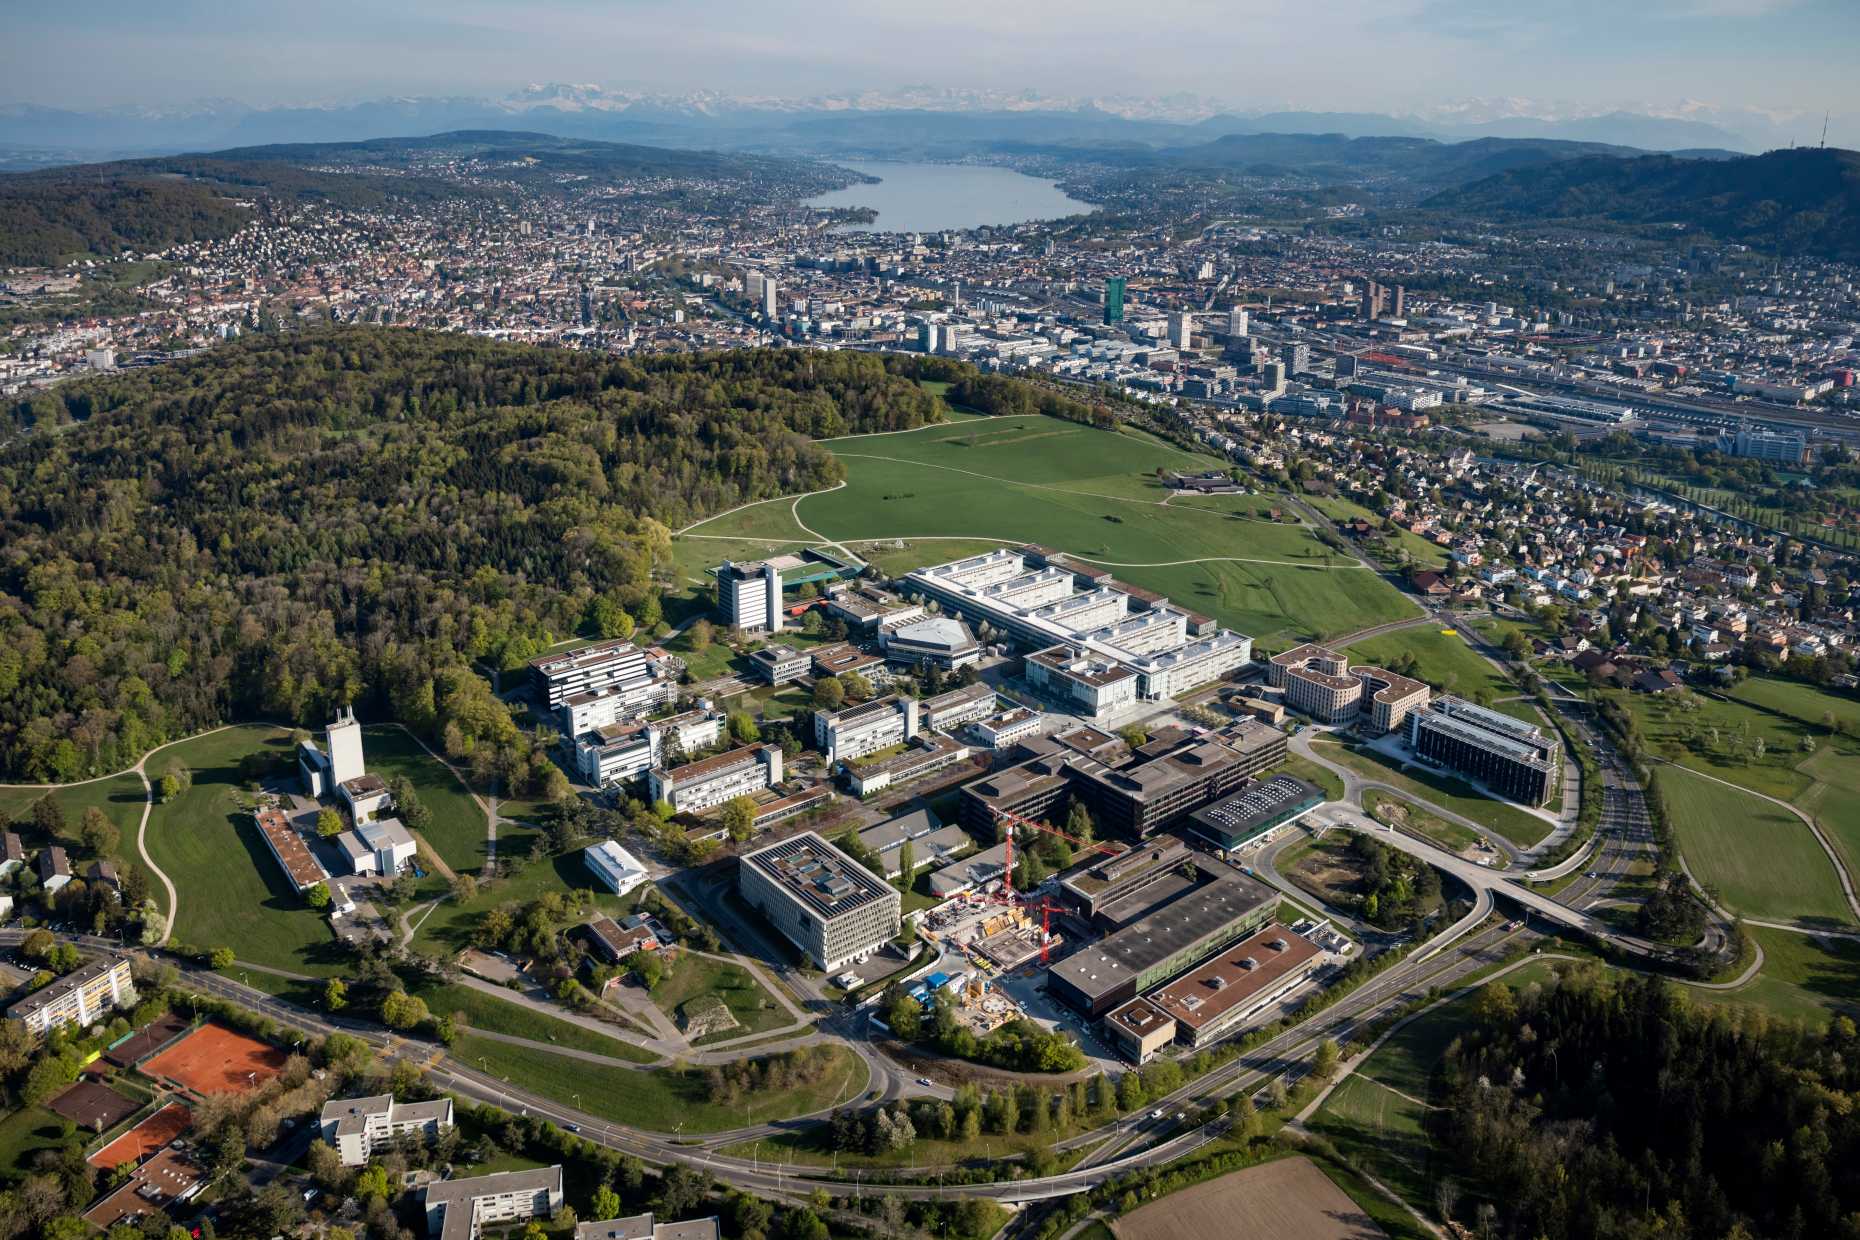 The Hönggerberg campus is undergoing further development on the basis of the Masterplan 2040. Image: Alessandro Della Bella